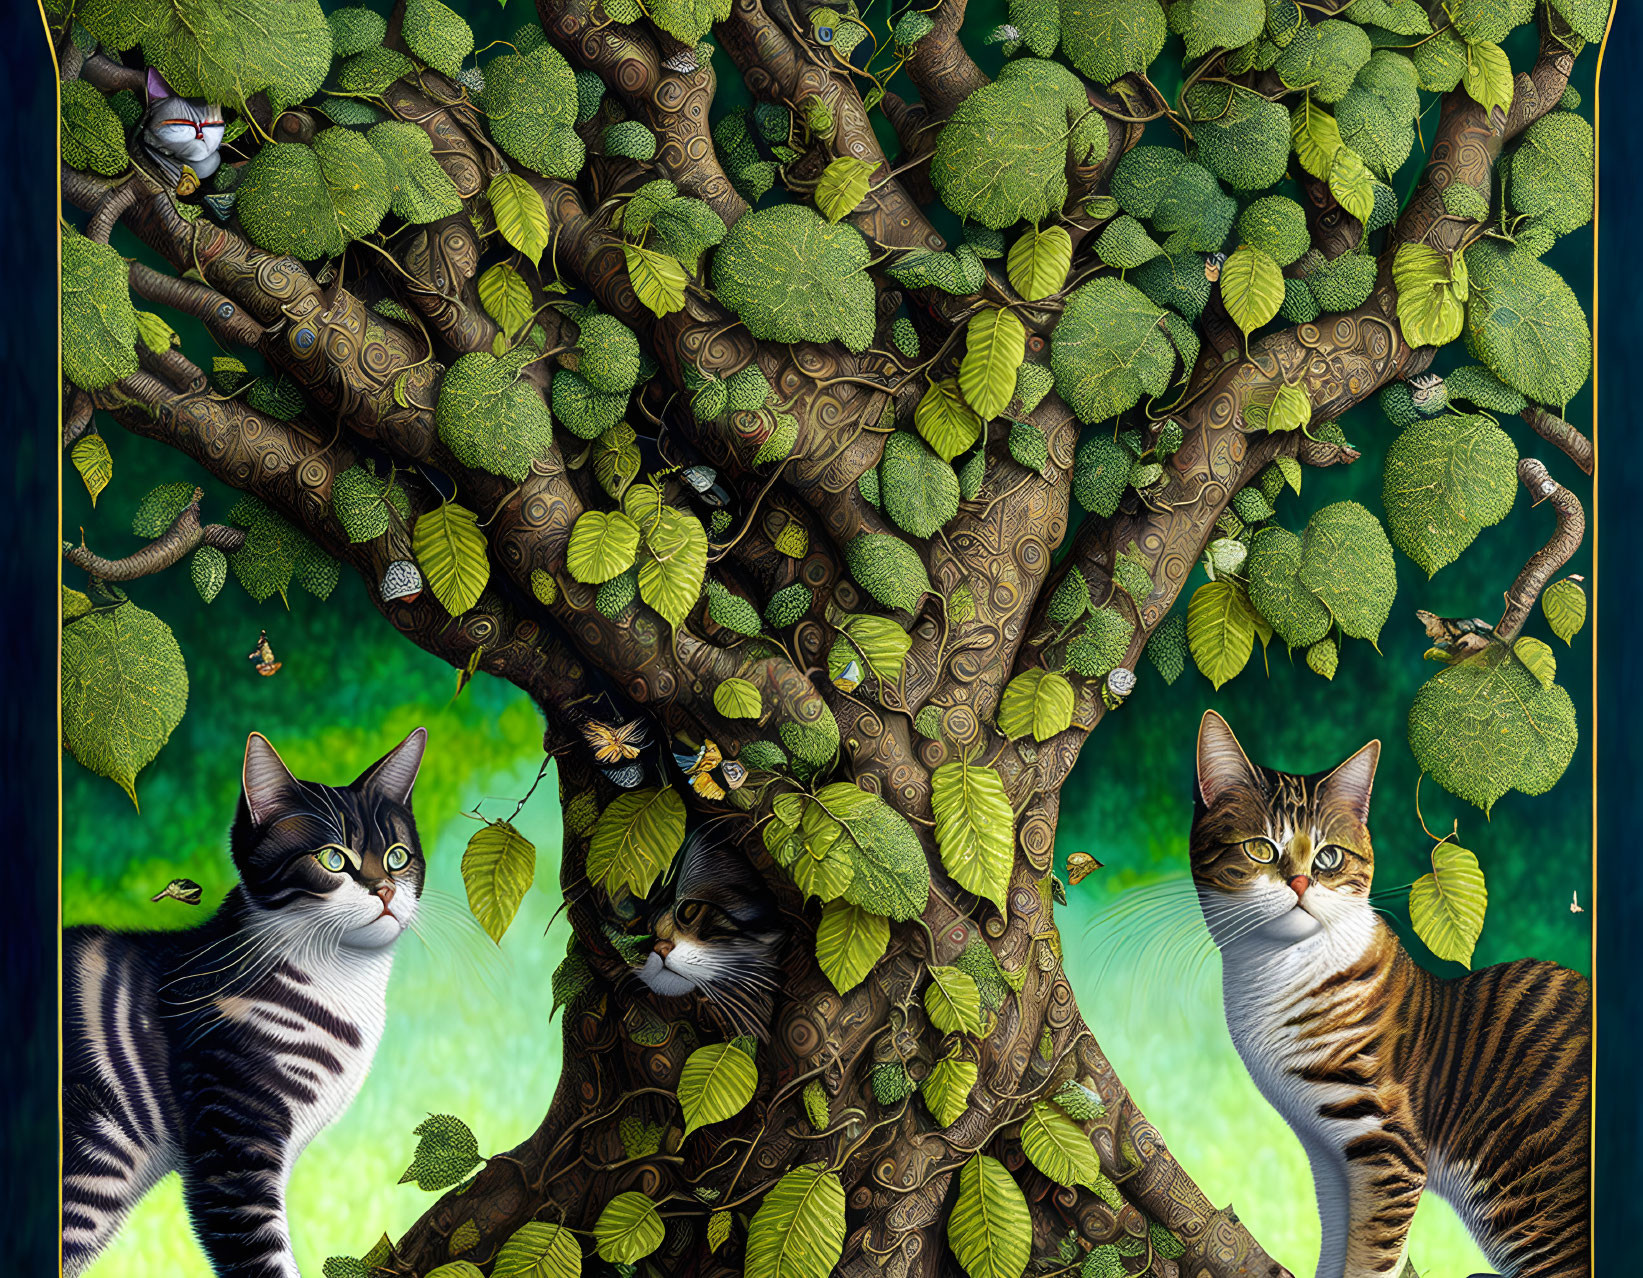 gold dicatus tree with leaves, cats. extreme detai